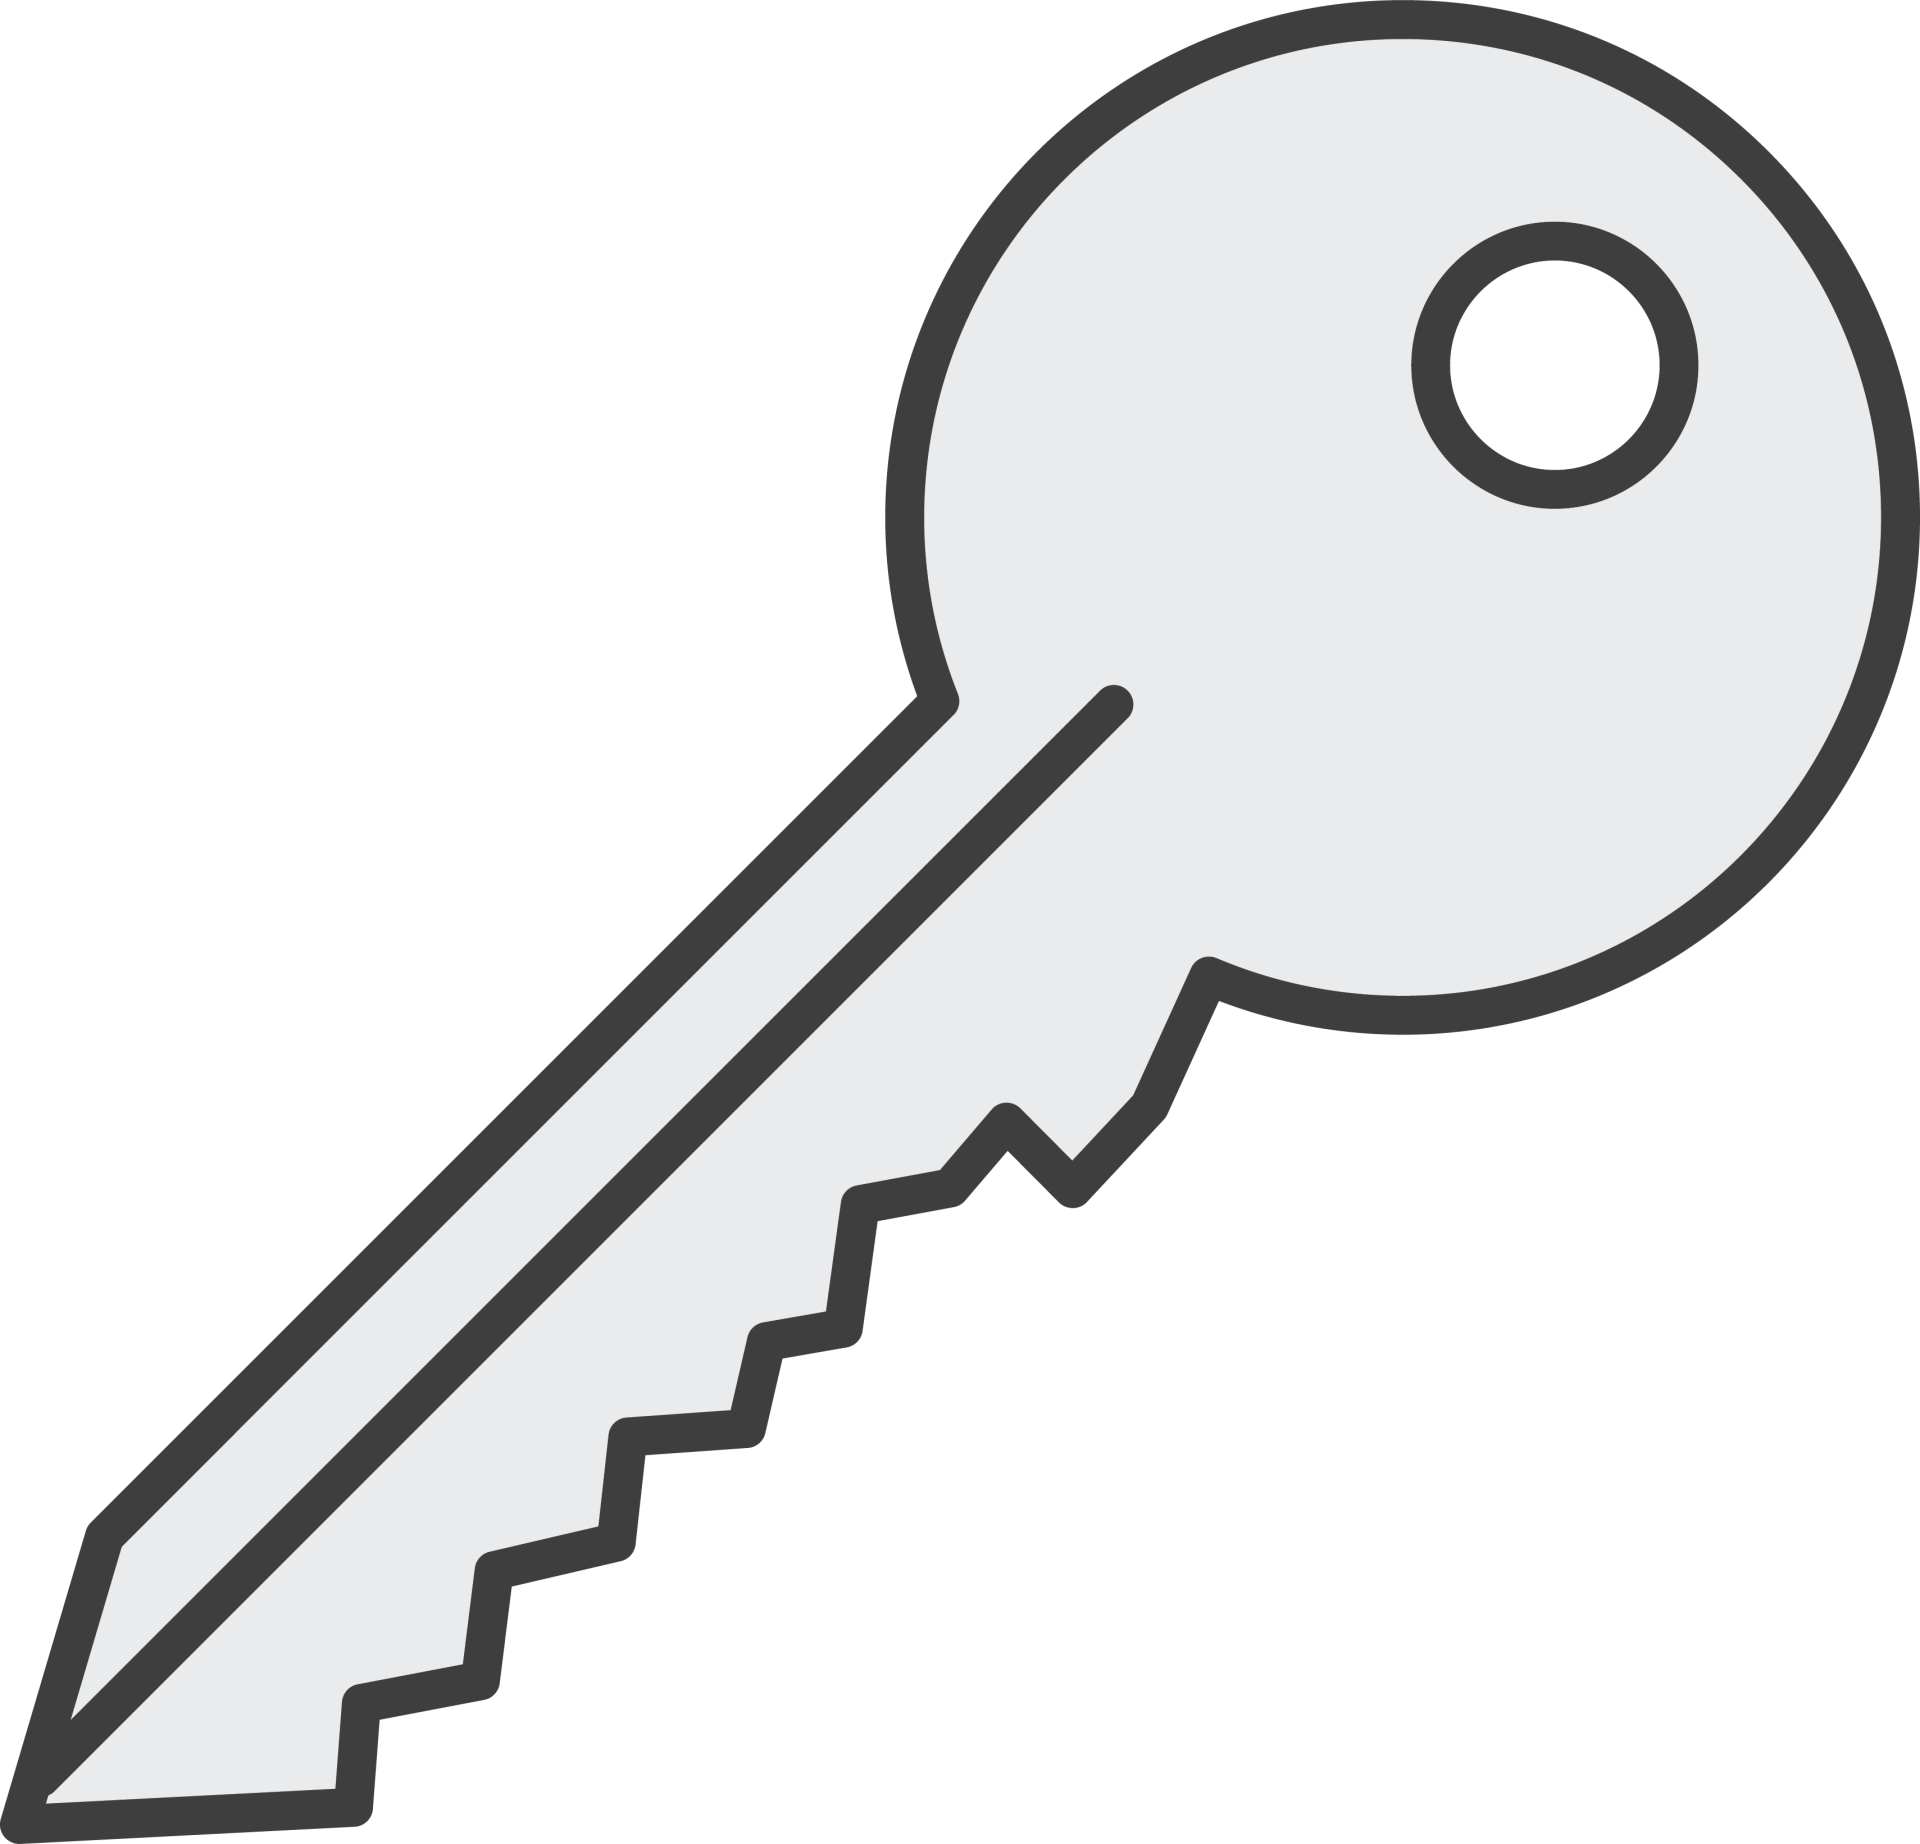 icon of a house key